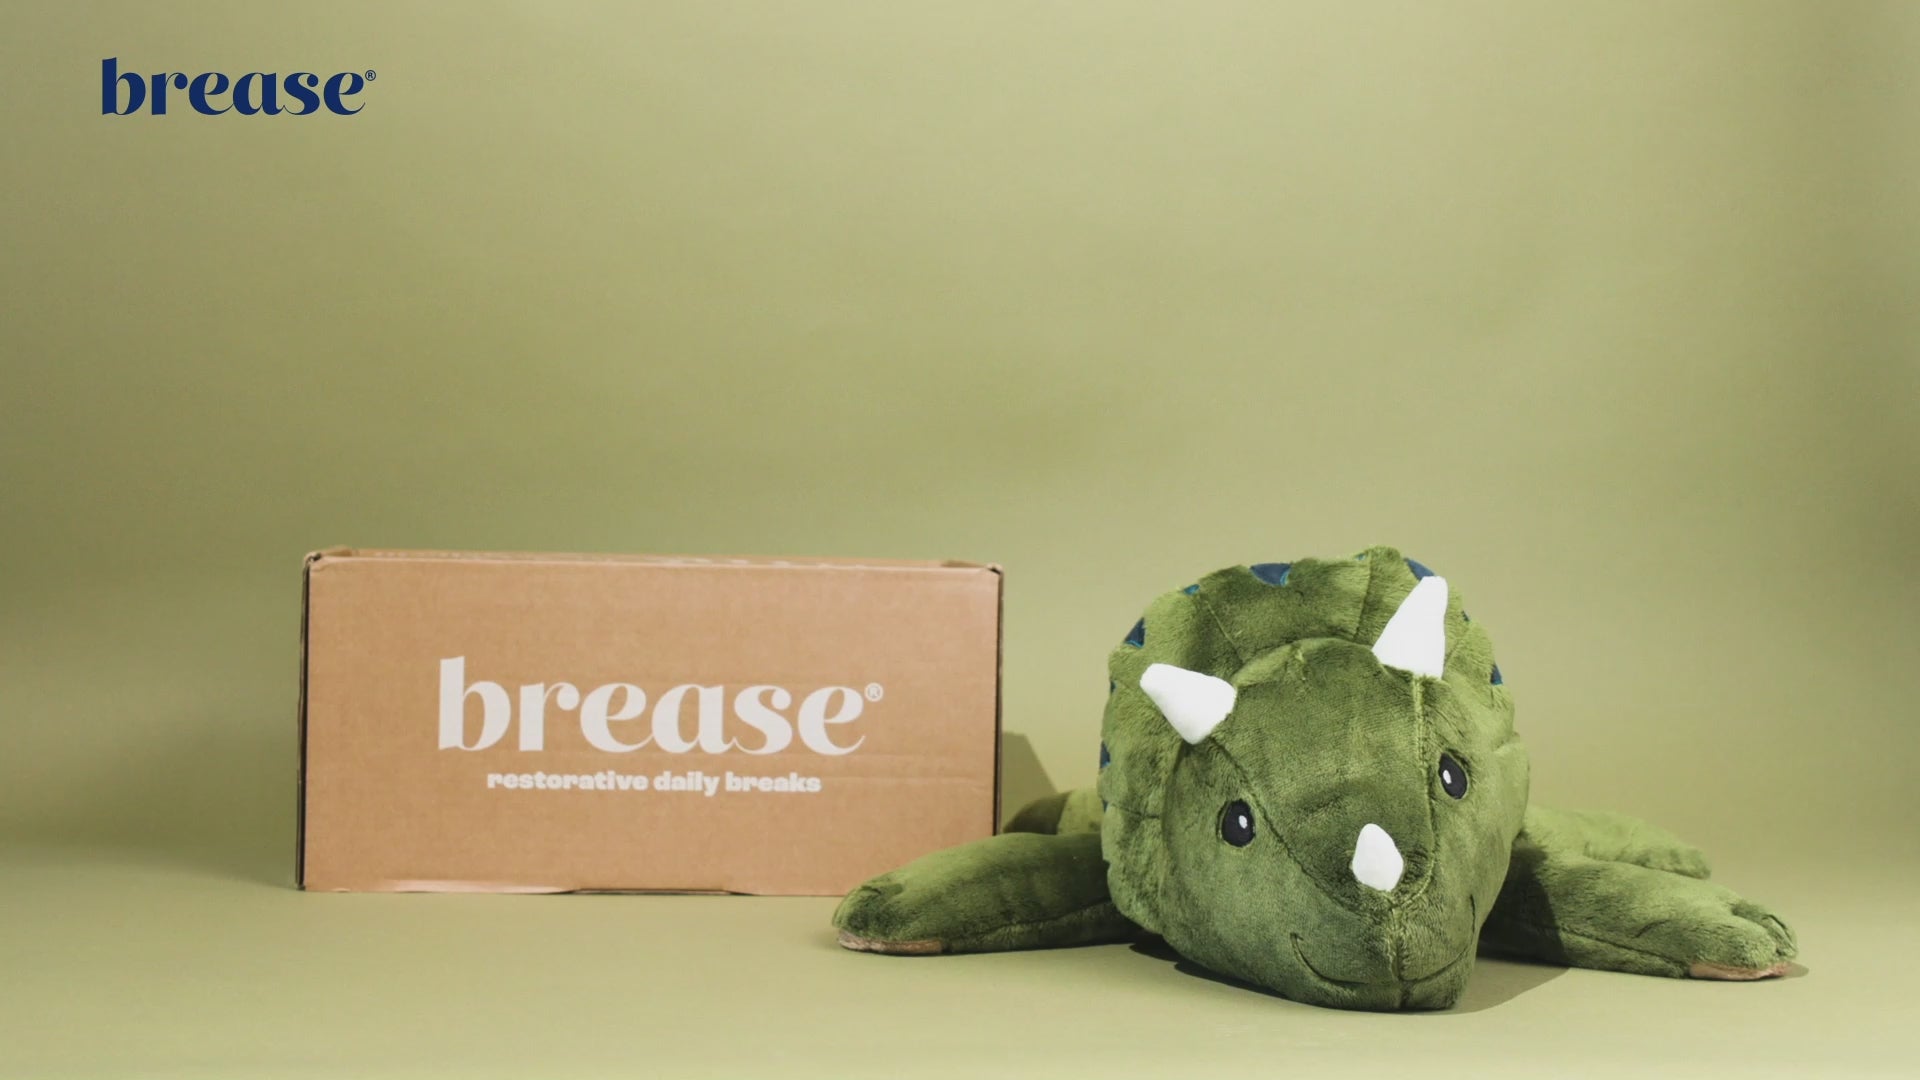 Load video: weighted dinosaur plush video